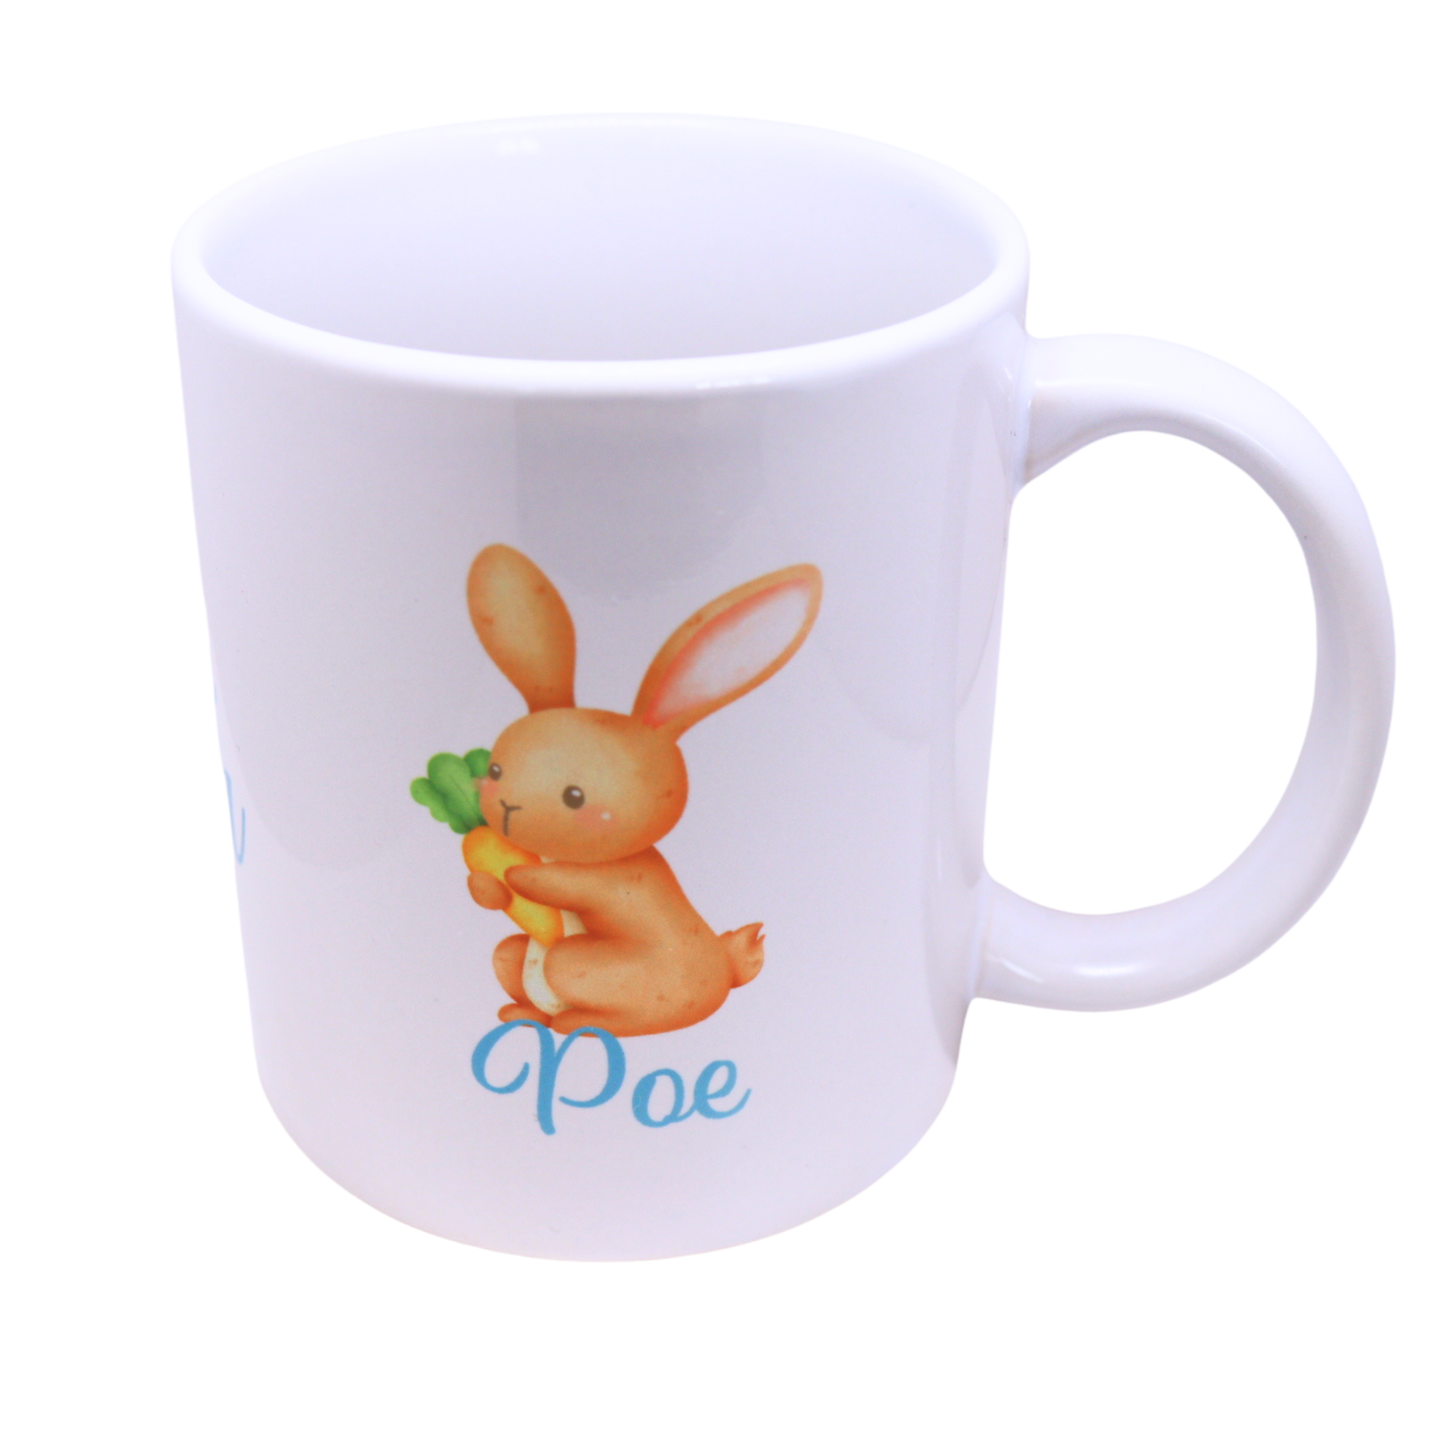 personalised easter mug. holds 325ml liquid. style is blue with bunny